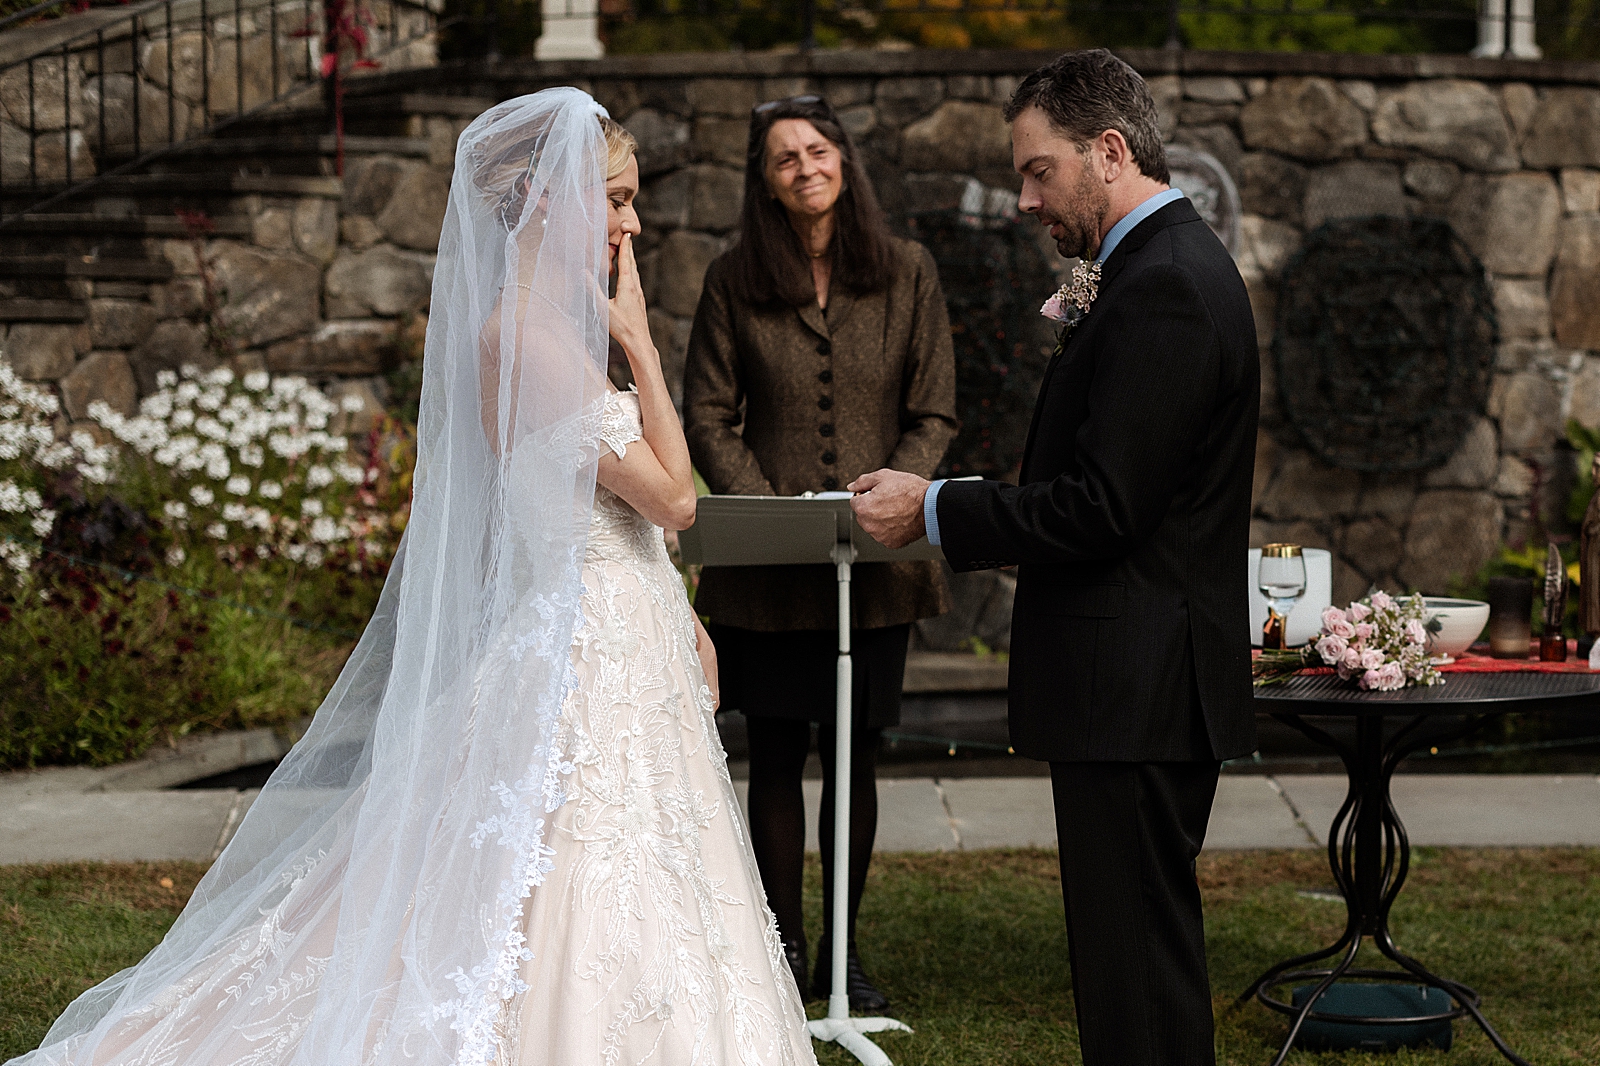 Groom giving vows to Bride outside in front of officiant Ceremony